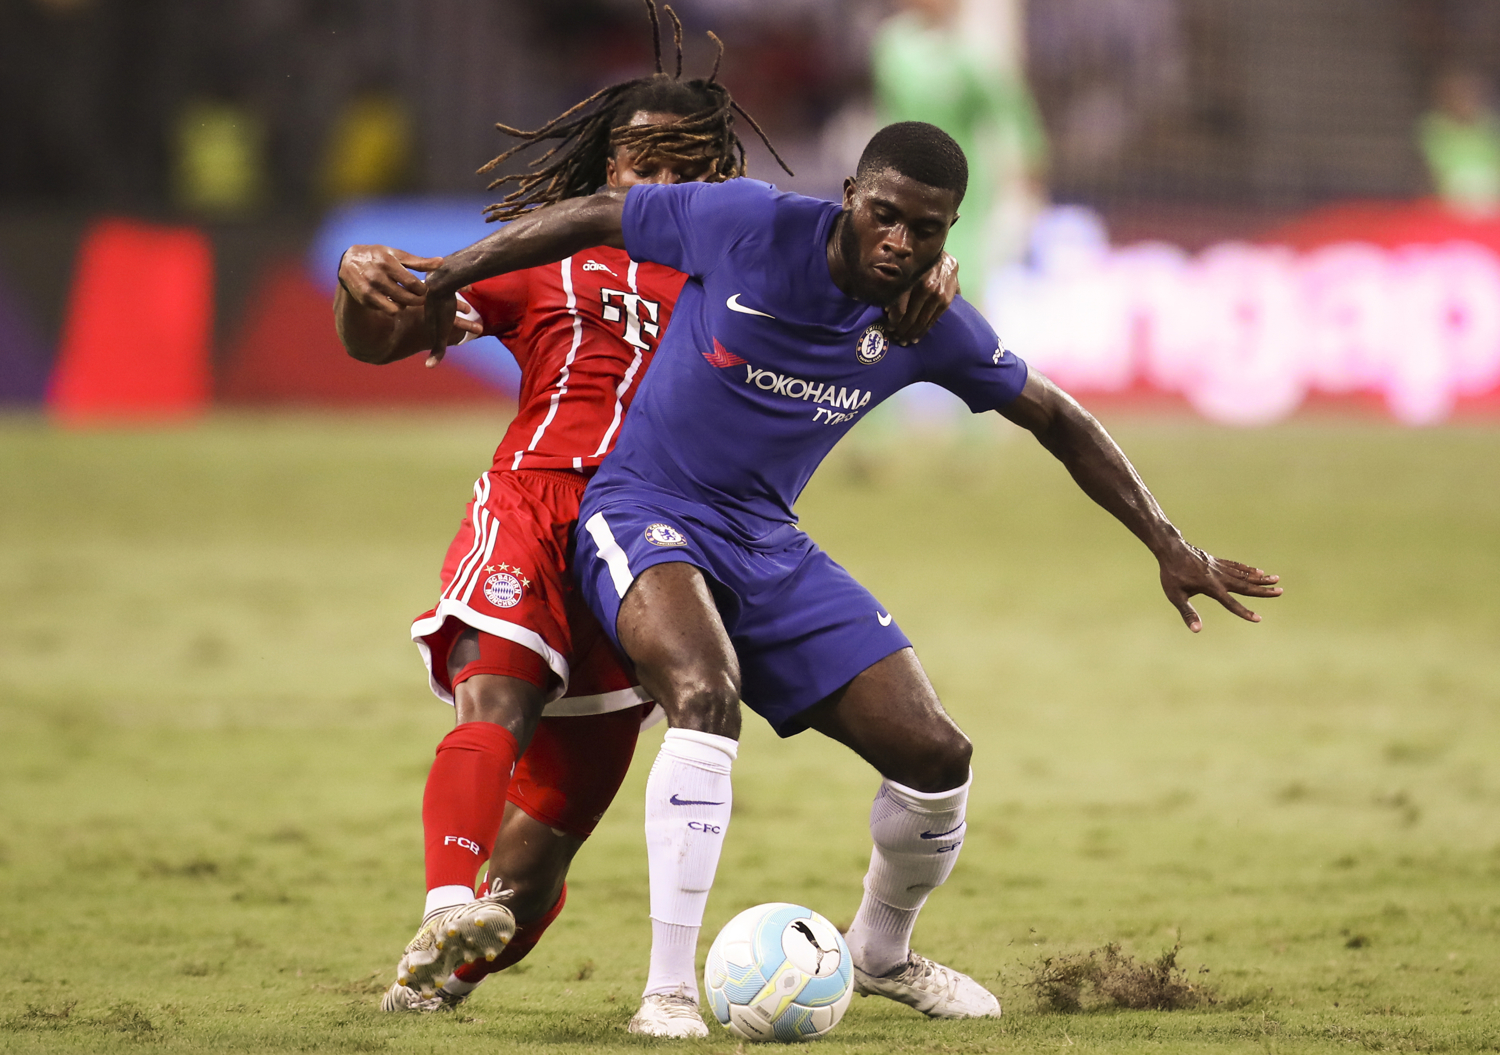  Soccer Football - Chelsea vs Bayern Munich - International Champions Cup - Singapore - July 25, 2017 Chelsea's Jeremie Boga in action against Bayern Munich's Renato Sanches REUTERS/Yong Teck Lim 